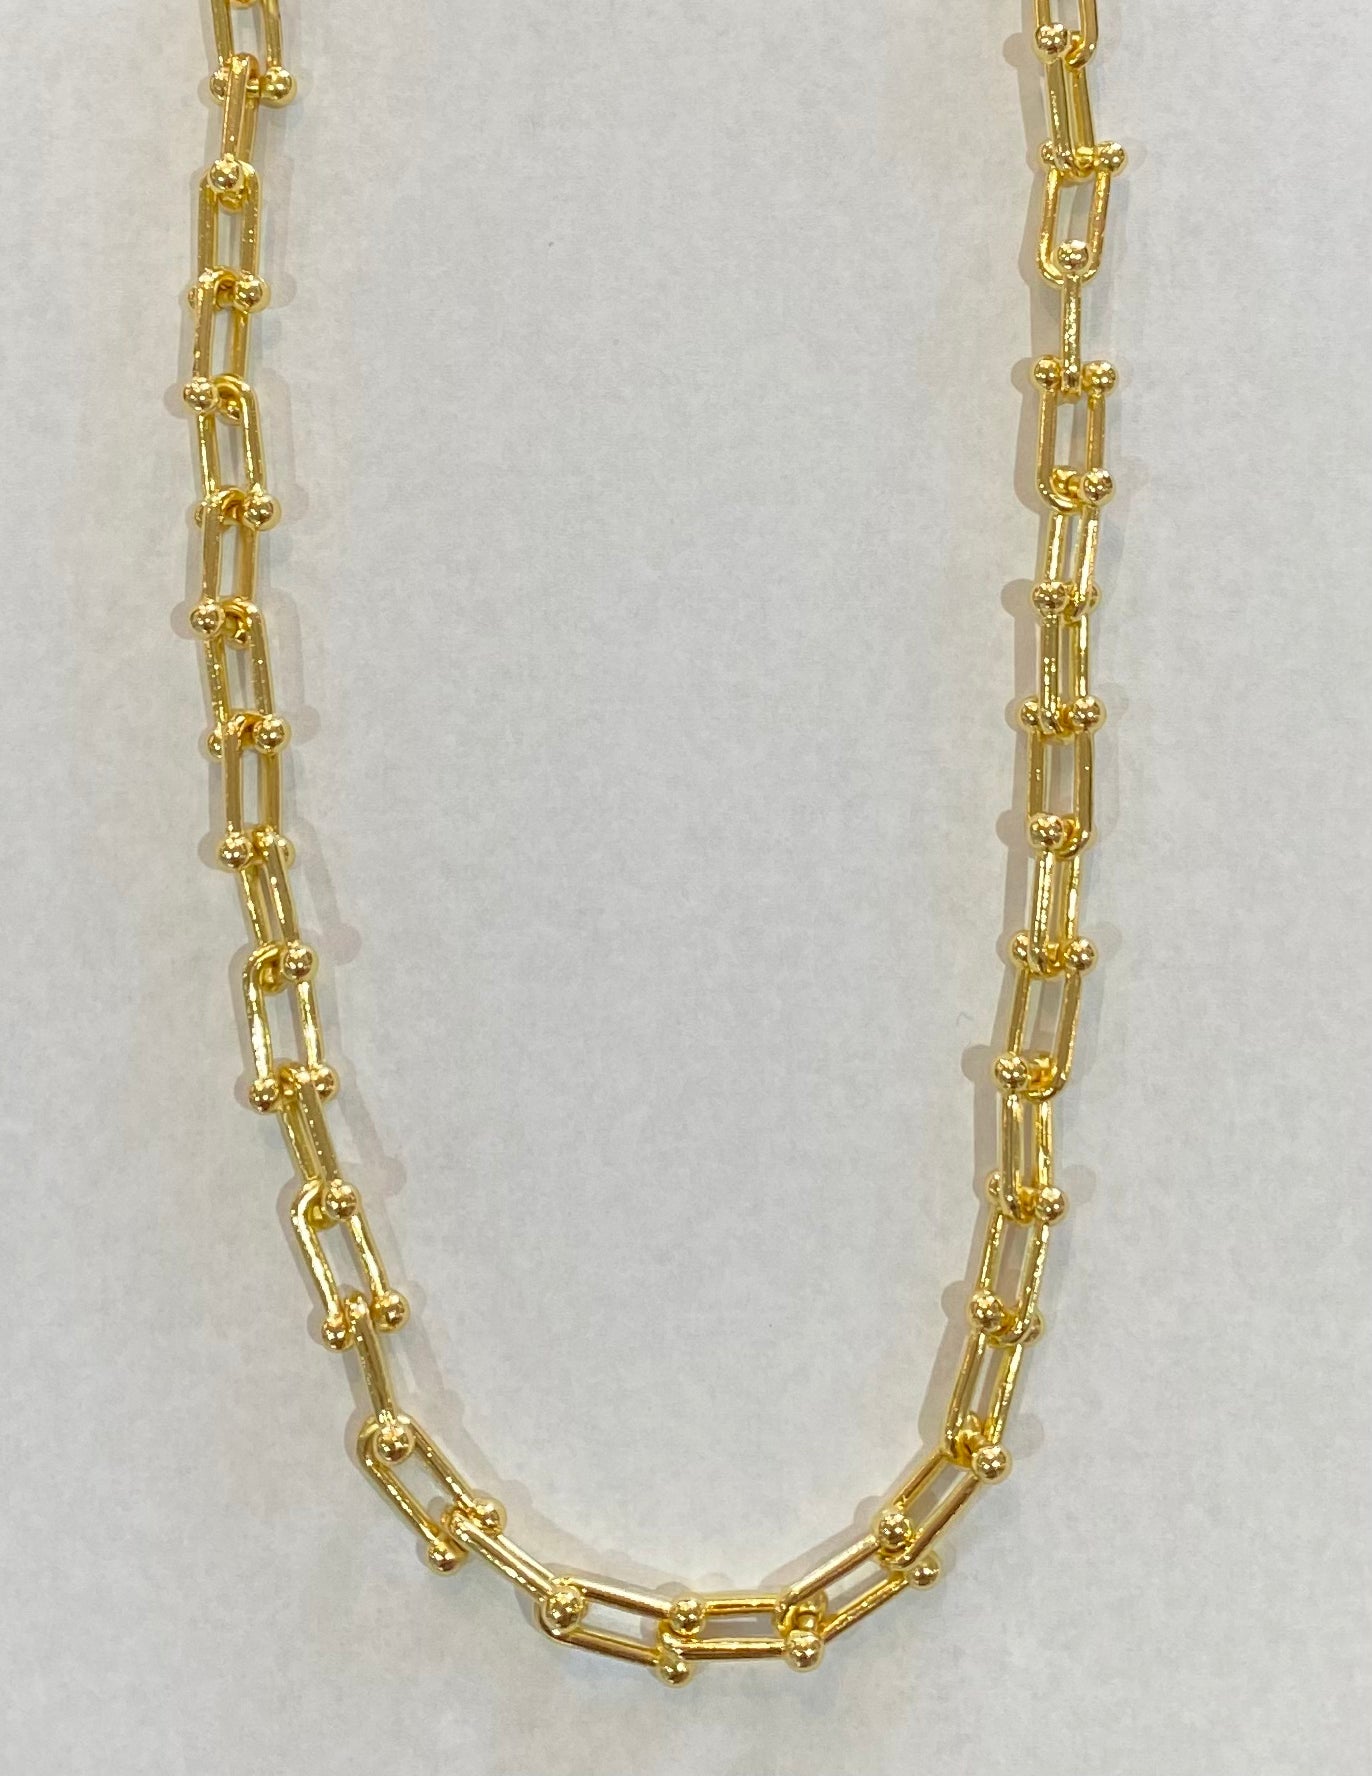 U Shaped Chain Necklace